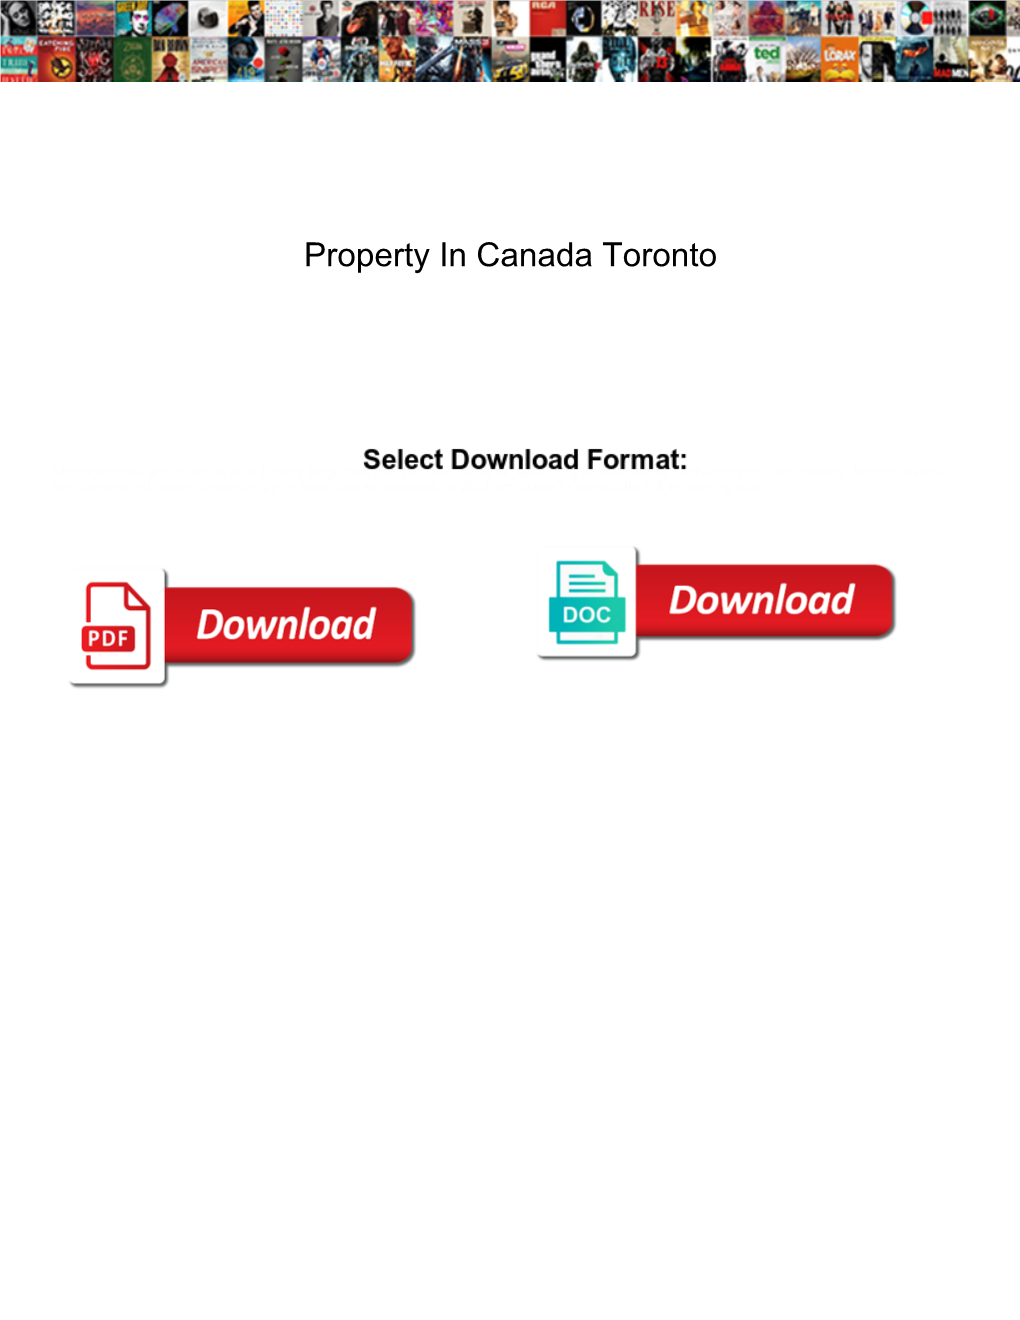 Property in Canada Toronto